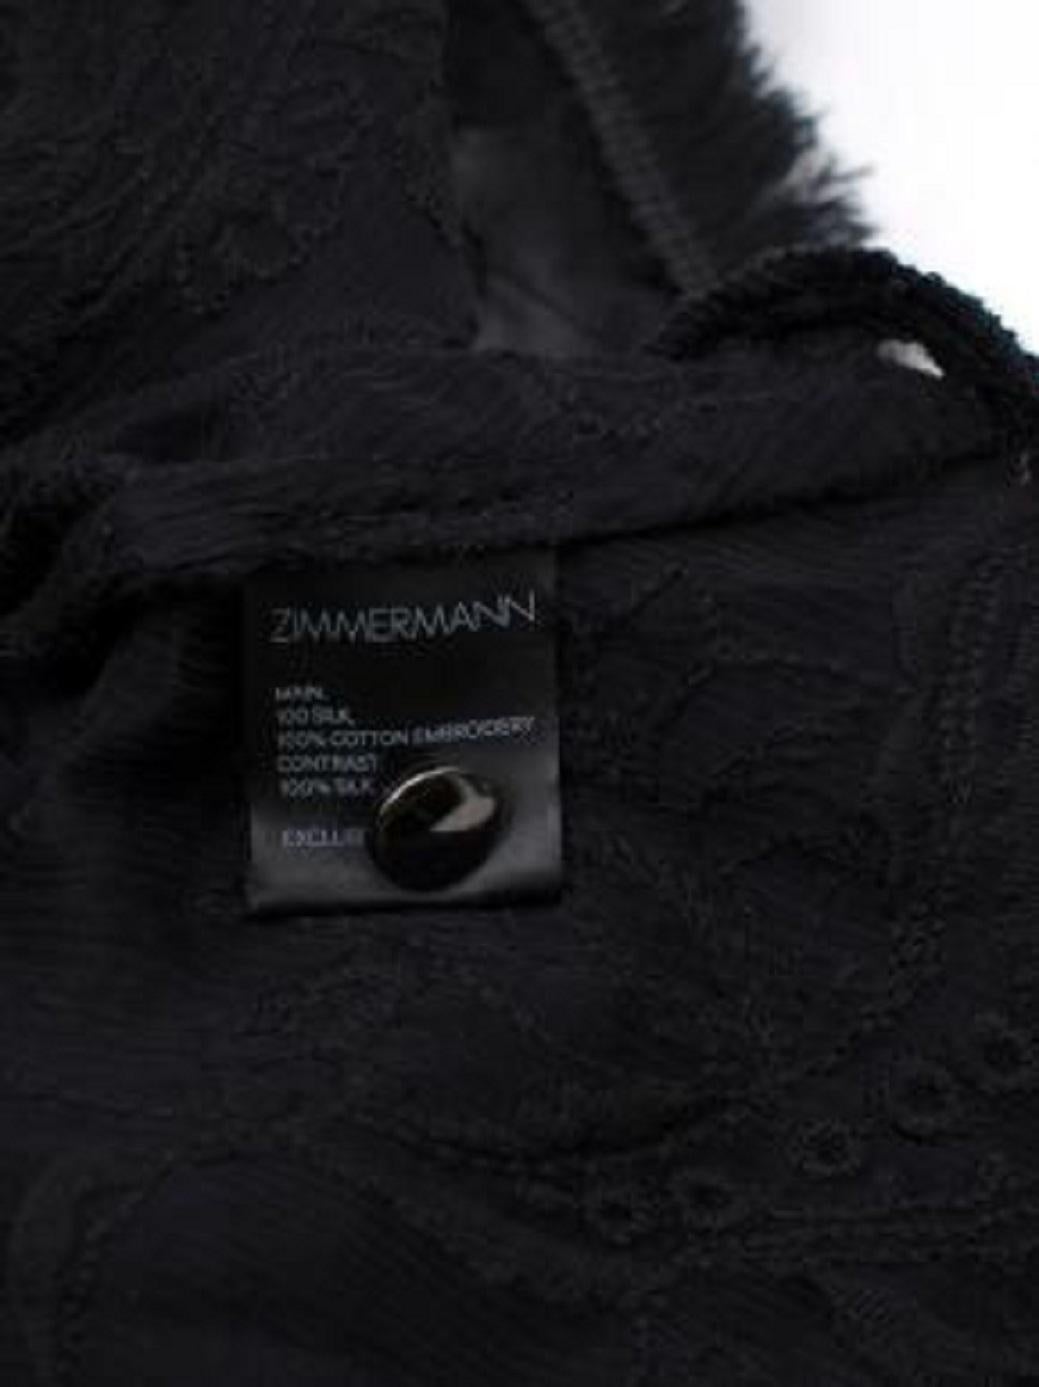 Zimmermann Sheer Black Lace Top For Sale 5